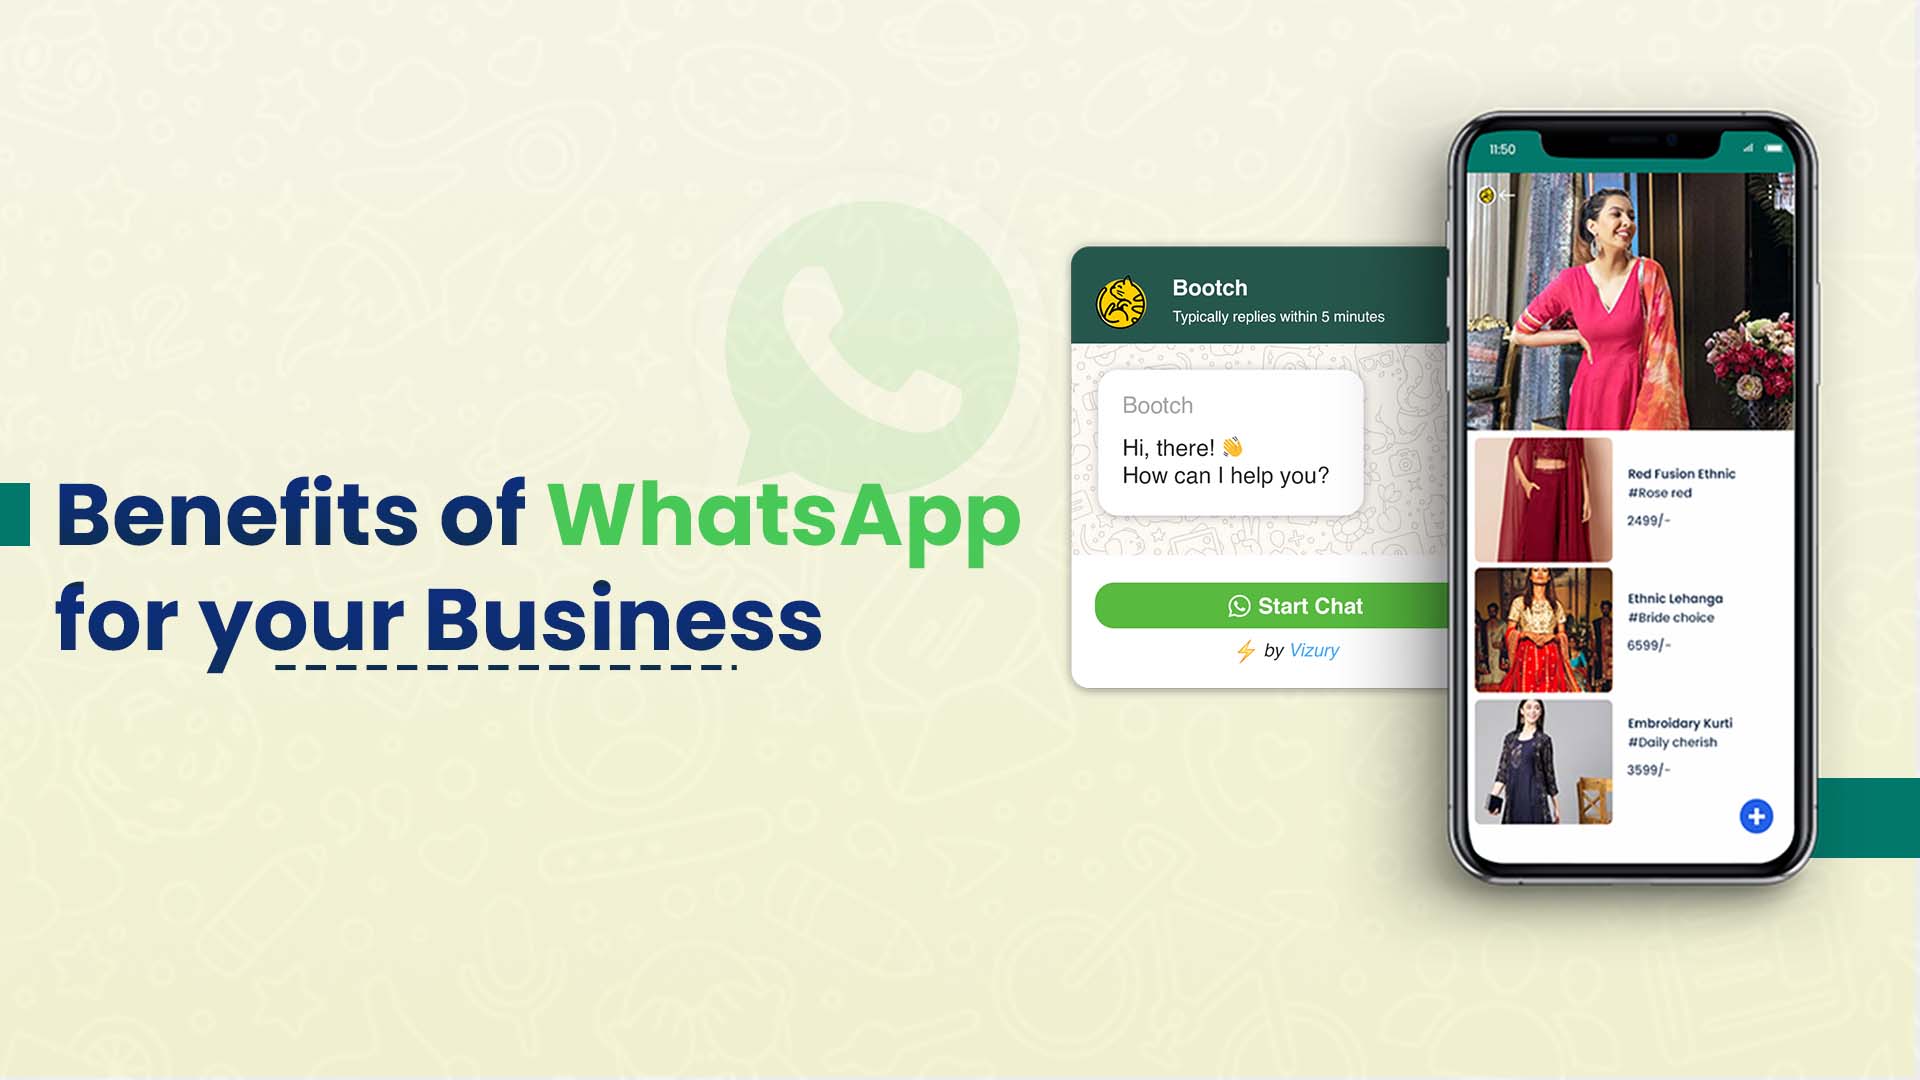 Benefits of WhatsApp for your Business